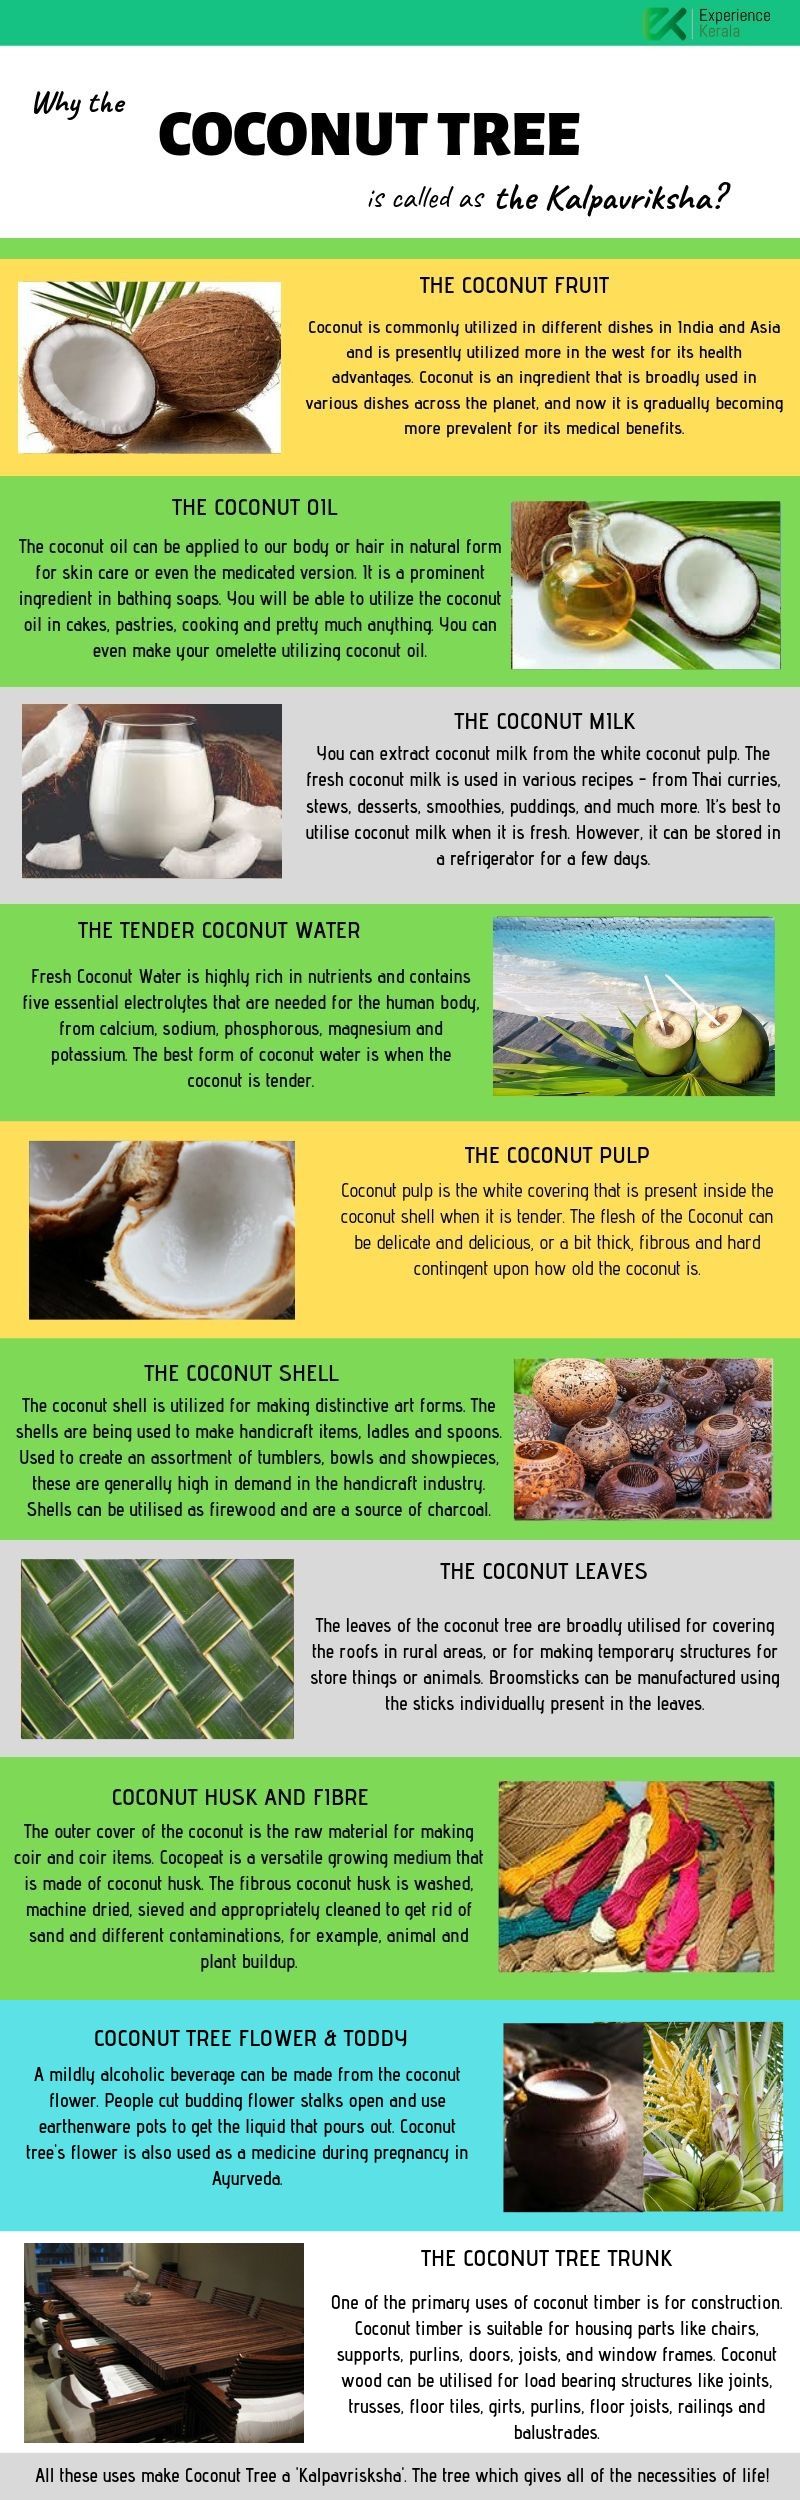 Uses of Coconut Tree